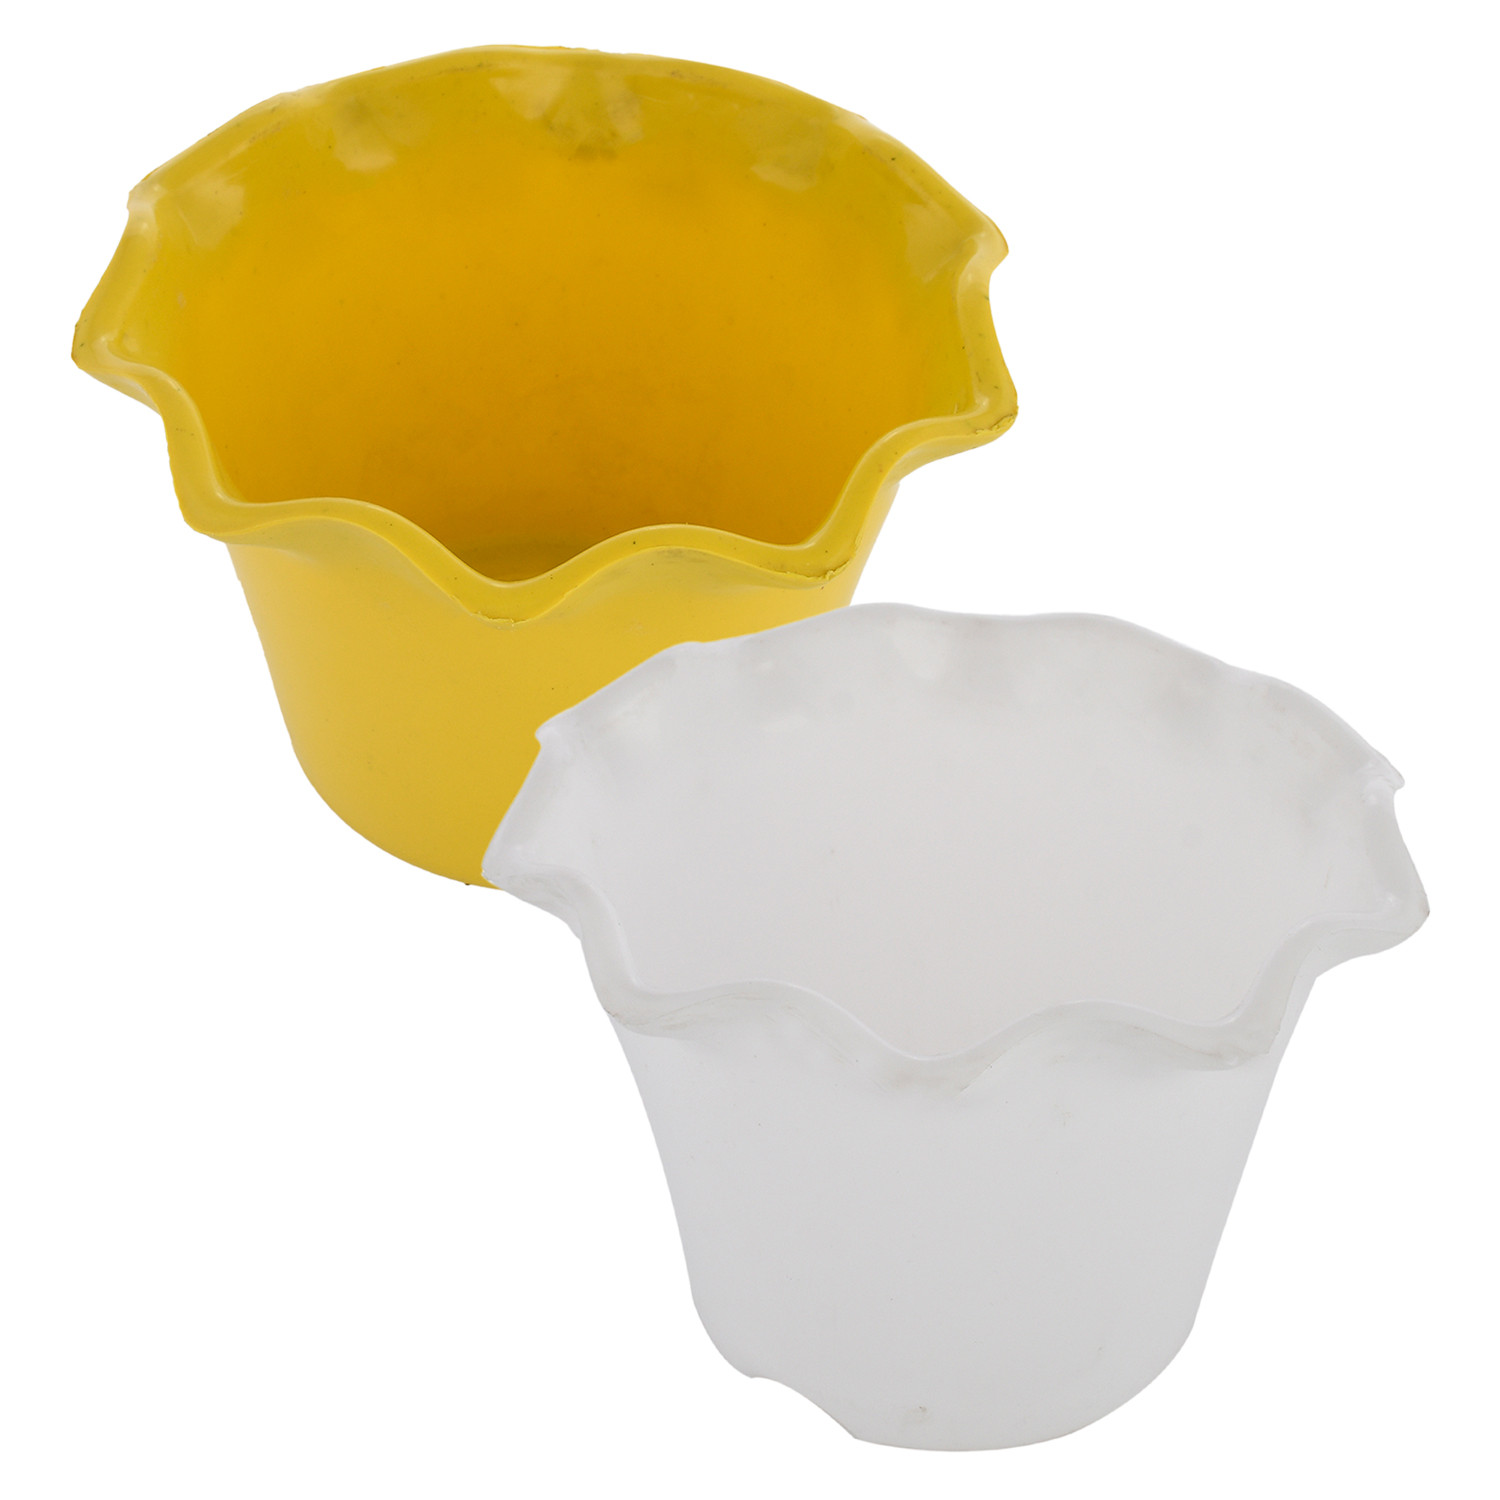 Kuber Industries Blossom Flower Pot|Durable Plastic Flower Pot|Gamla With Drain Holes for Home Décor|Balcony|Garden|8 Inch|Pack of 2 (White & Yellow)